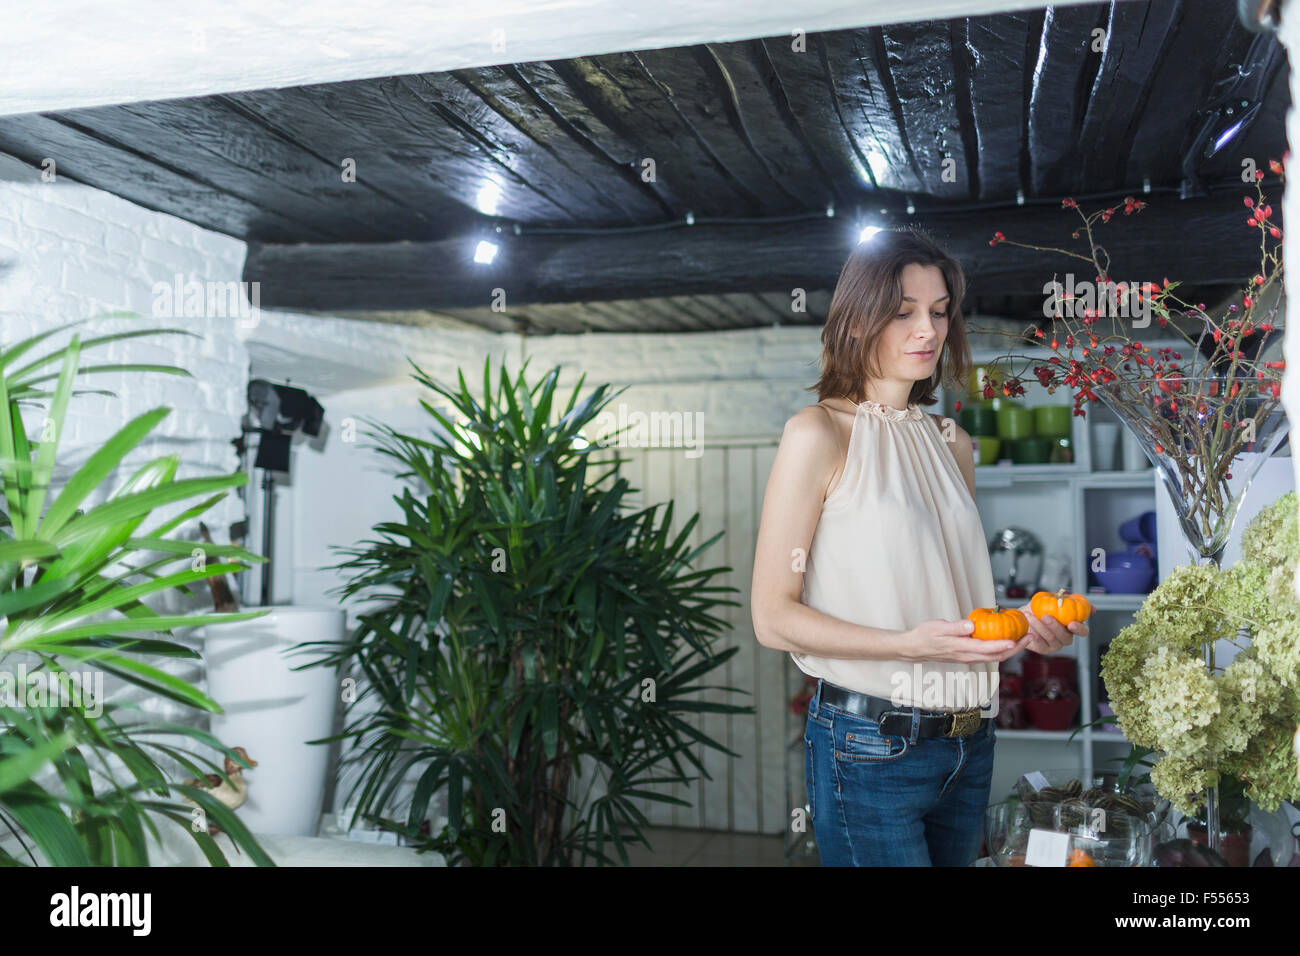 Female owner holding artificial pumpkins at decor shop Stock Photo